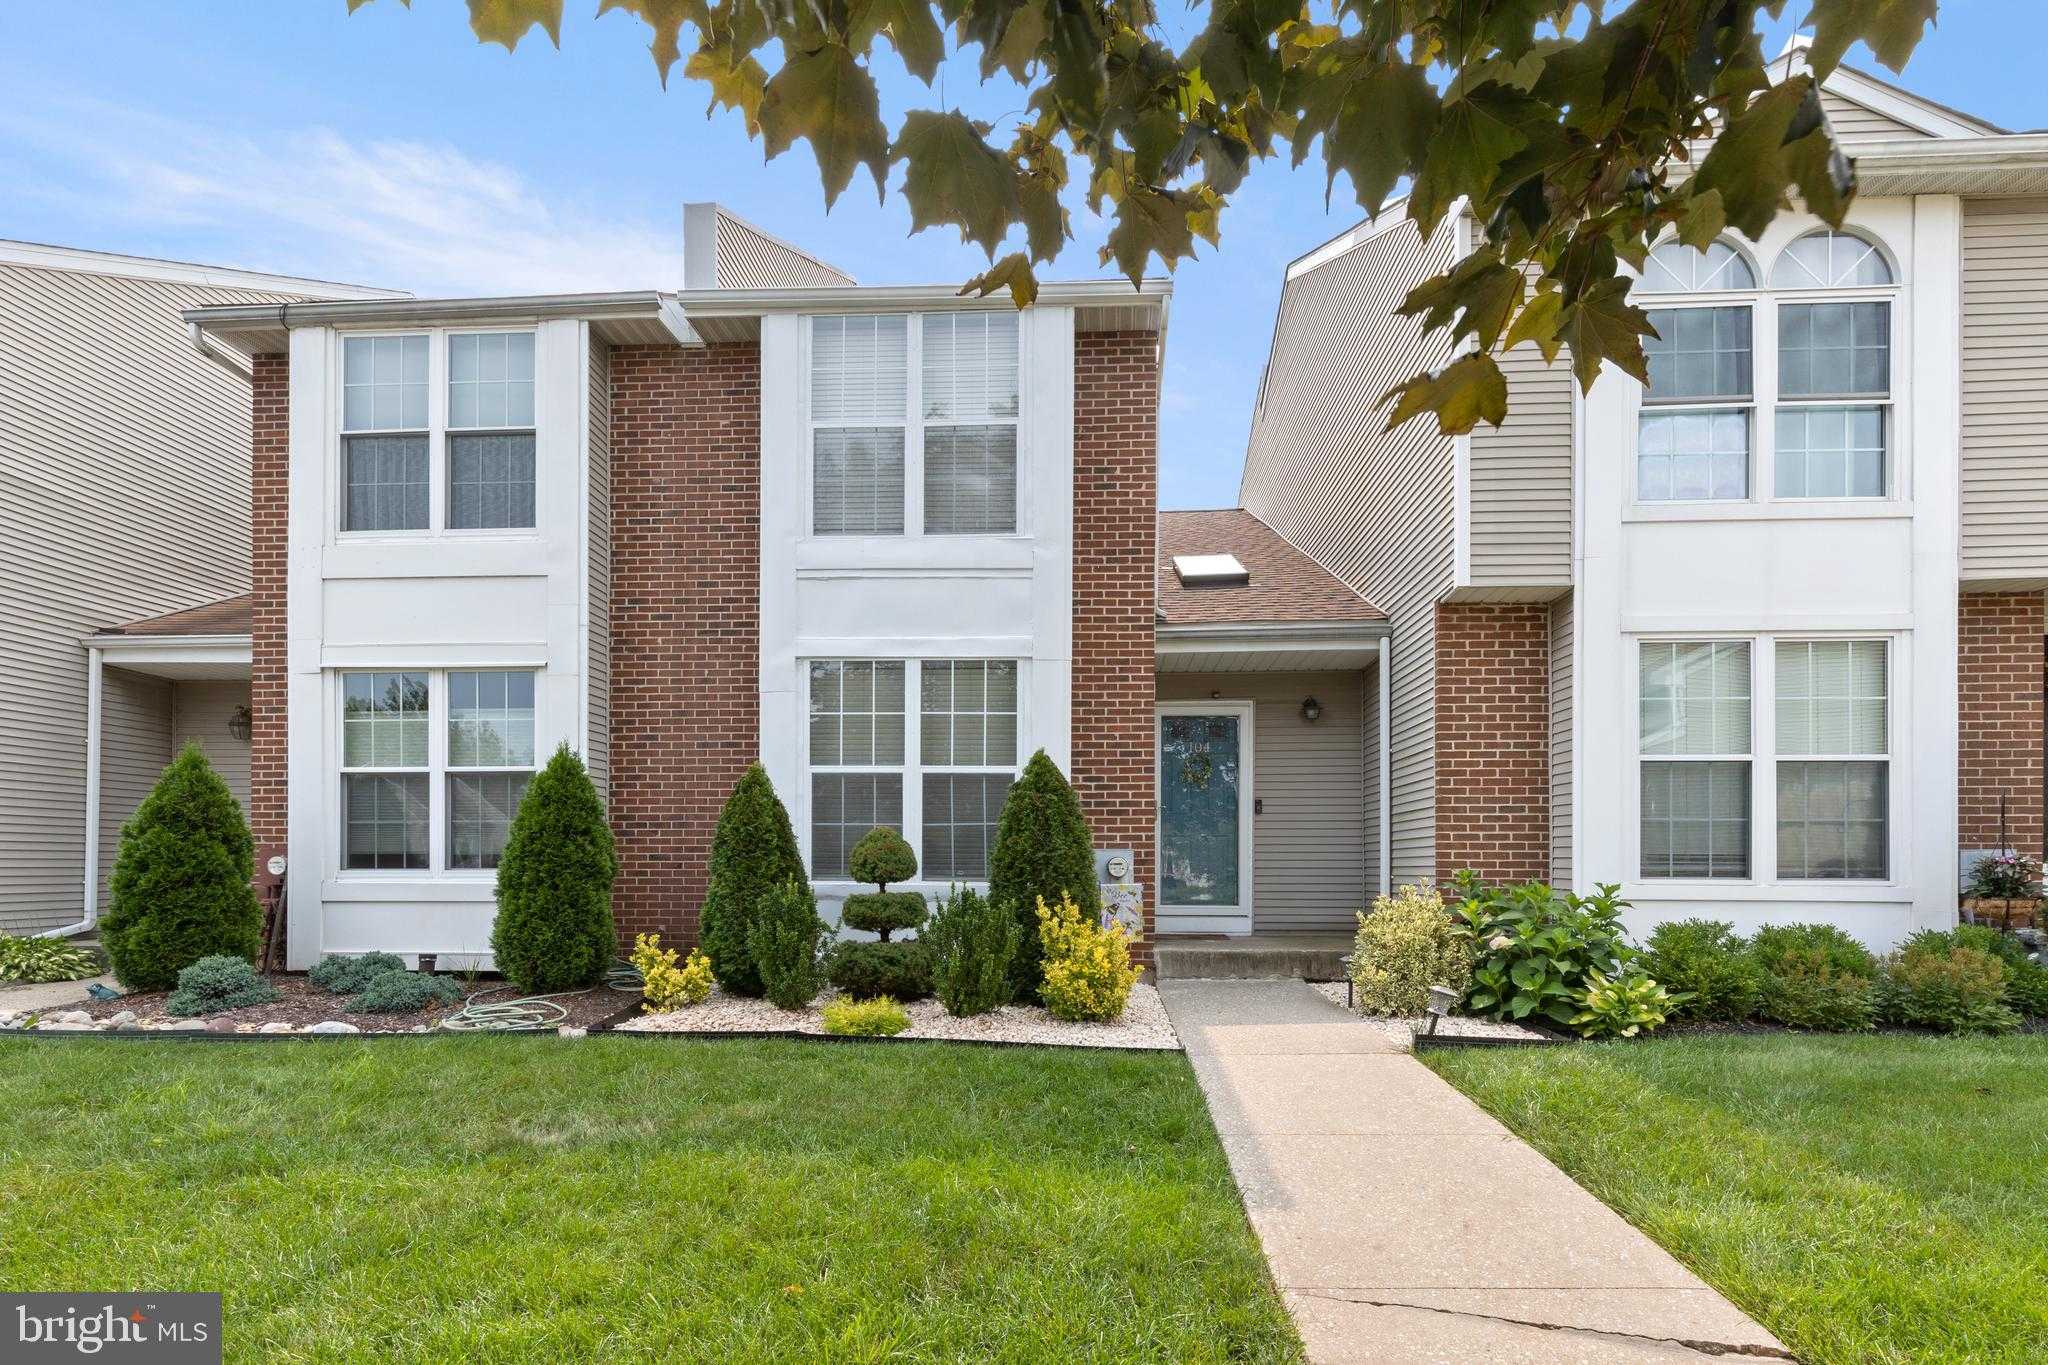 View NORRISTOWN, PA 19401 townhome